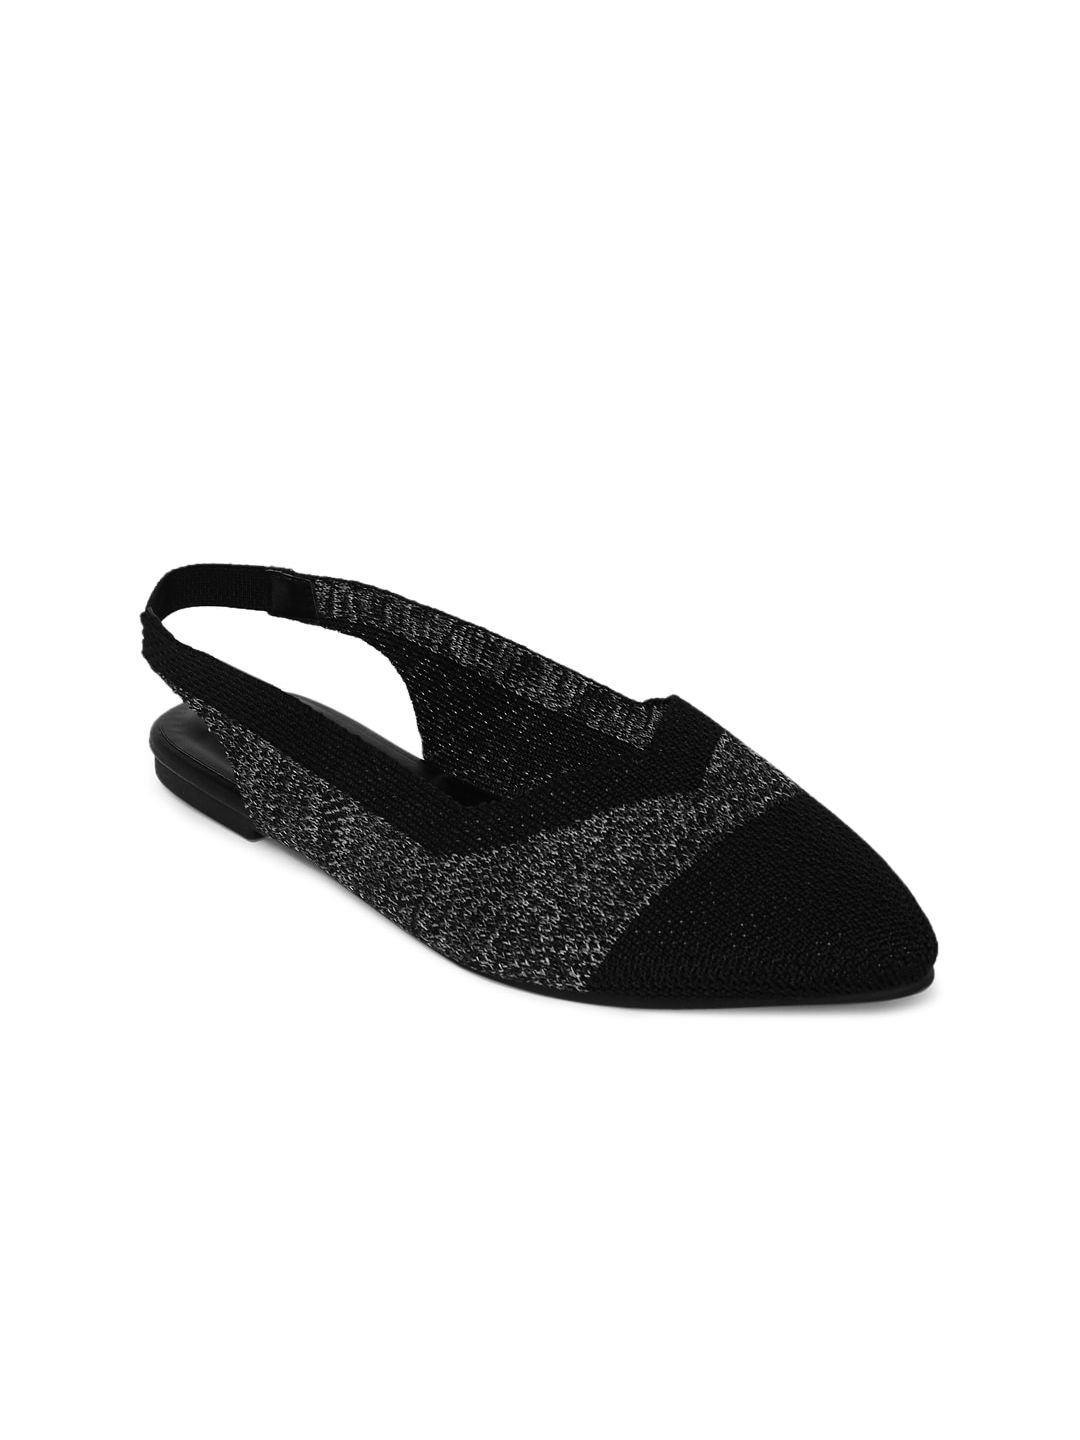 Forever Glam by Pantaloons Women Black Woven Design Flatforms Shoes Price in India